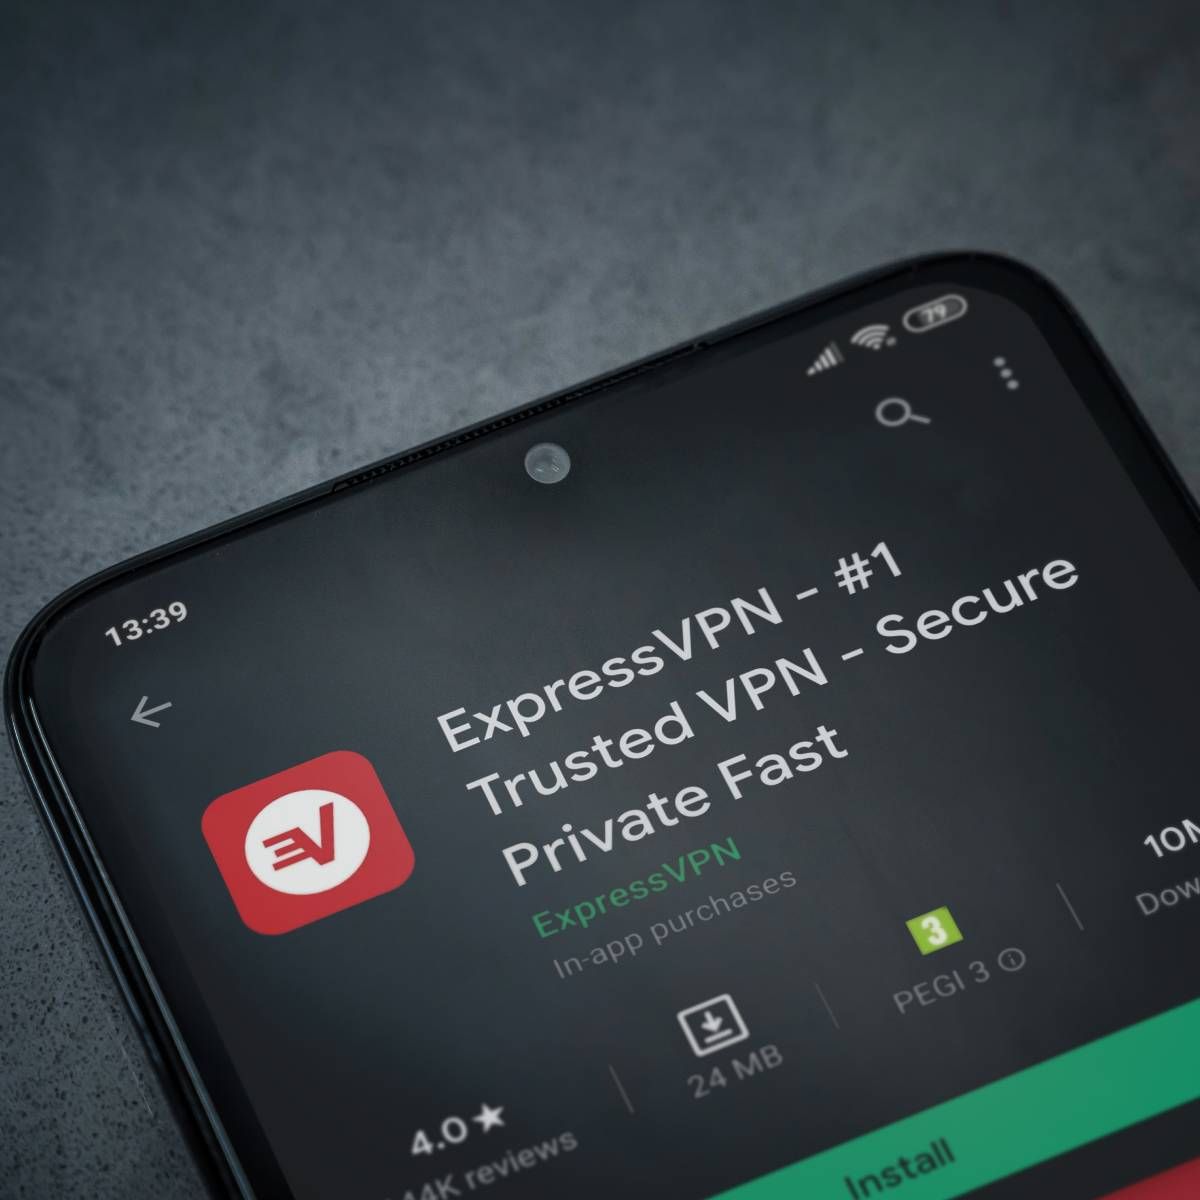 The ExpressVPN app download page on display of a smartphone.